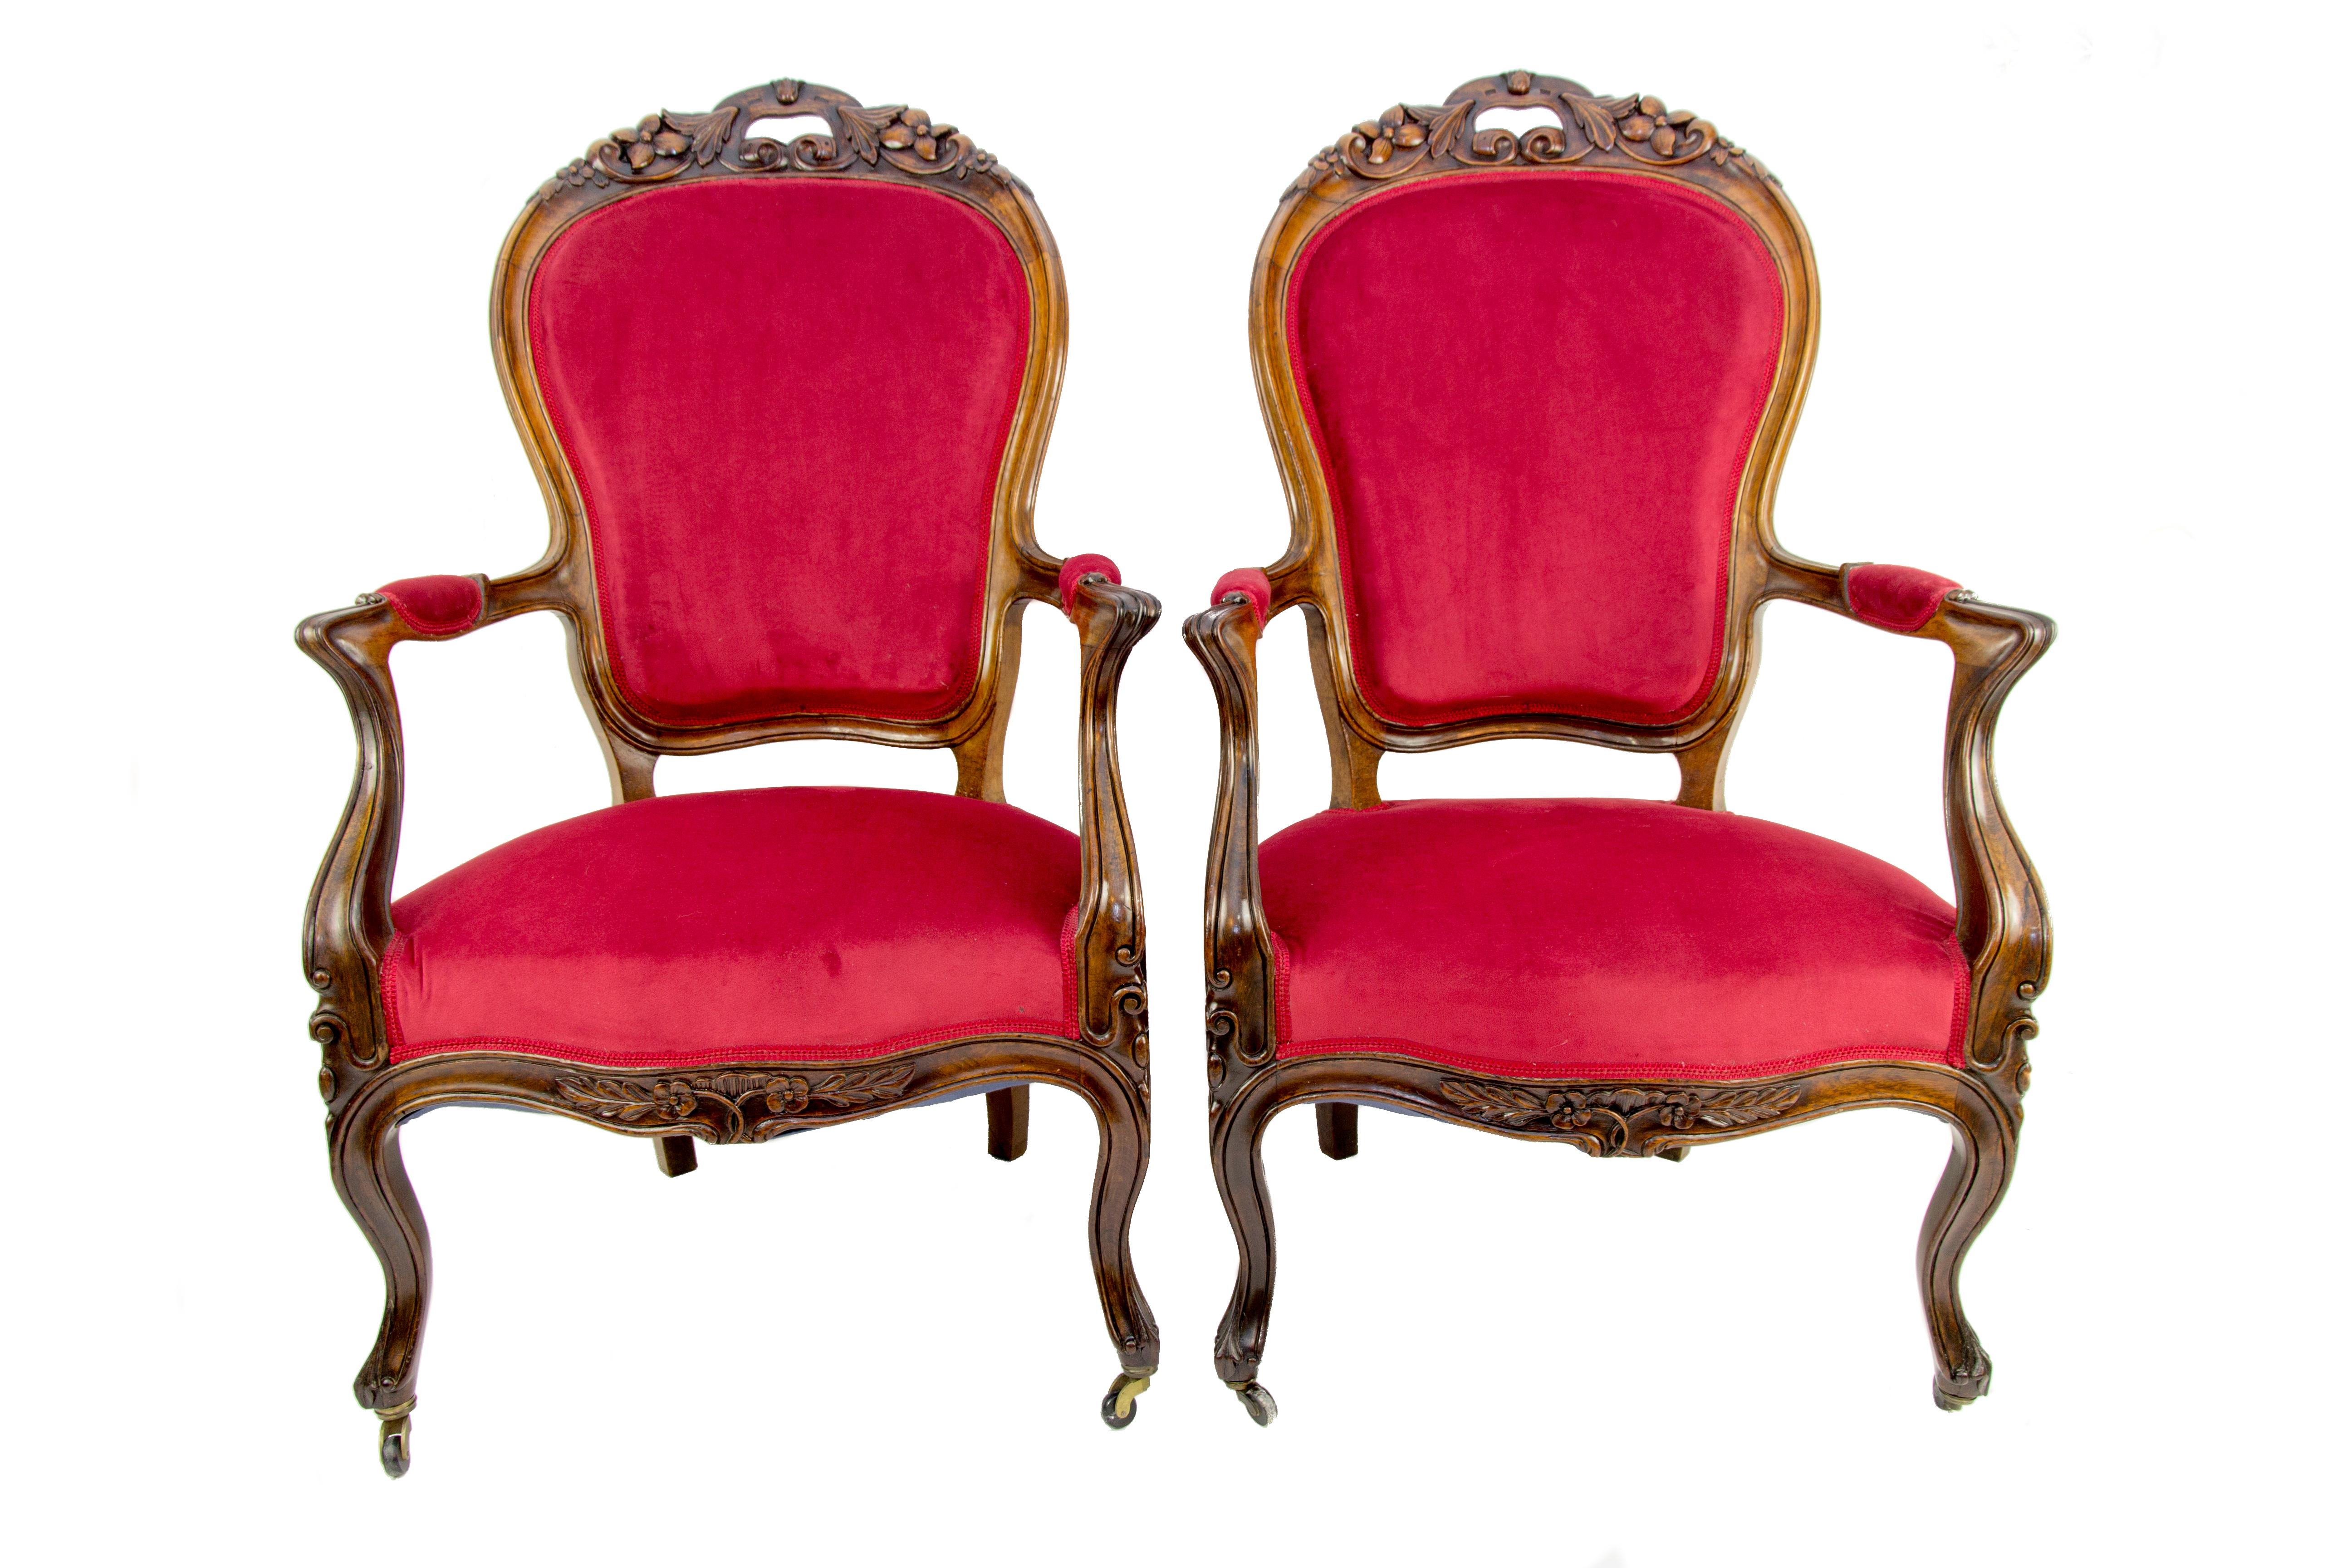 Pair of Louis XV style armchairs or fauteuils from the late 19th century is made of walnut wood, with an upholstered seat, armrests, and a backrest, decorated with beautiful floral carvings. The front legs of the armchairs are cabriole, on rollers.